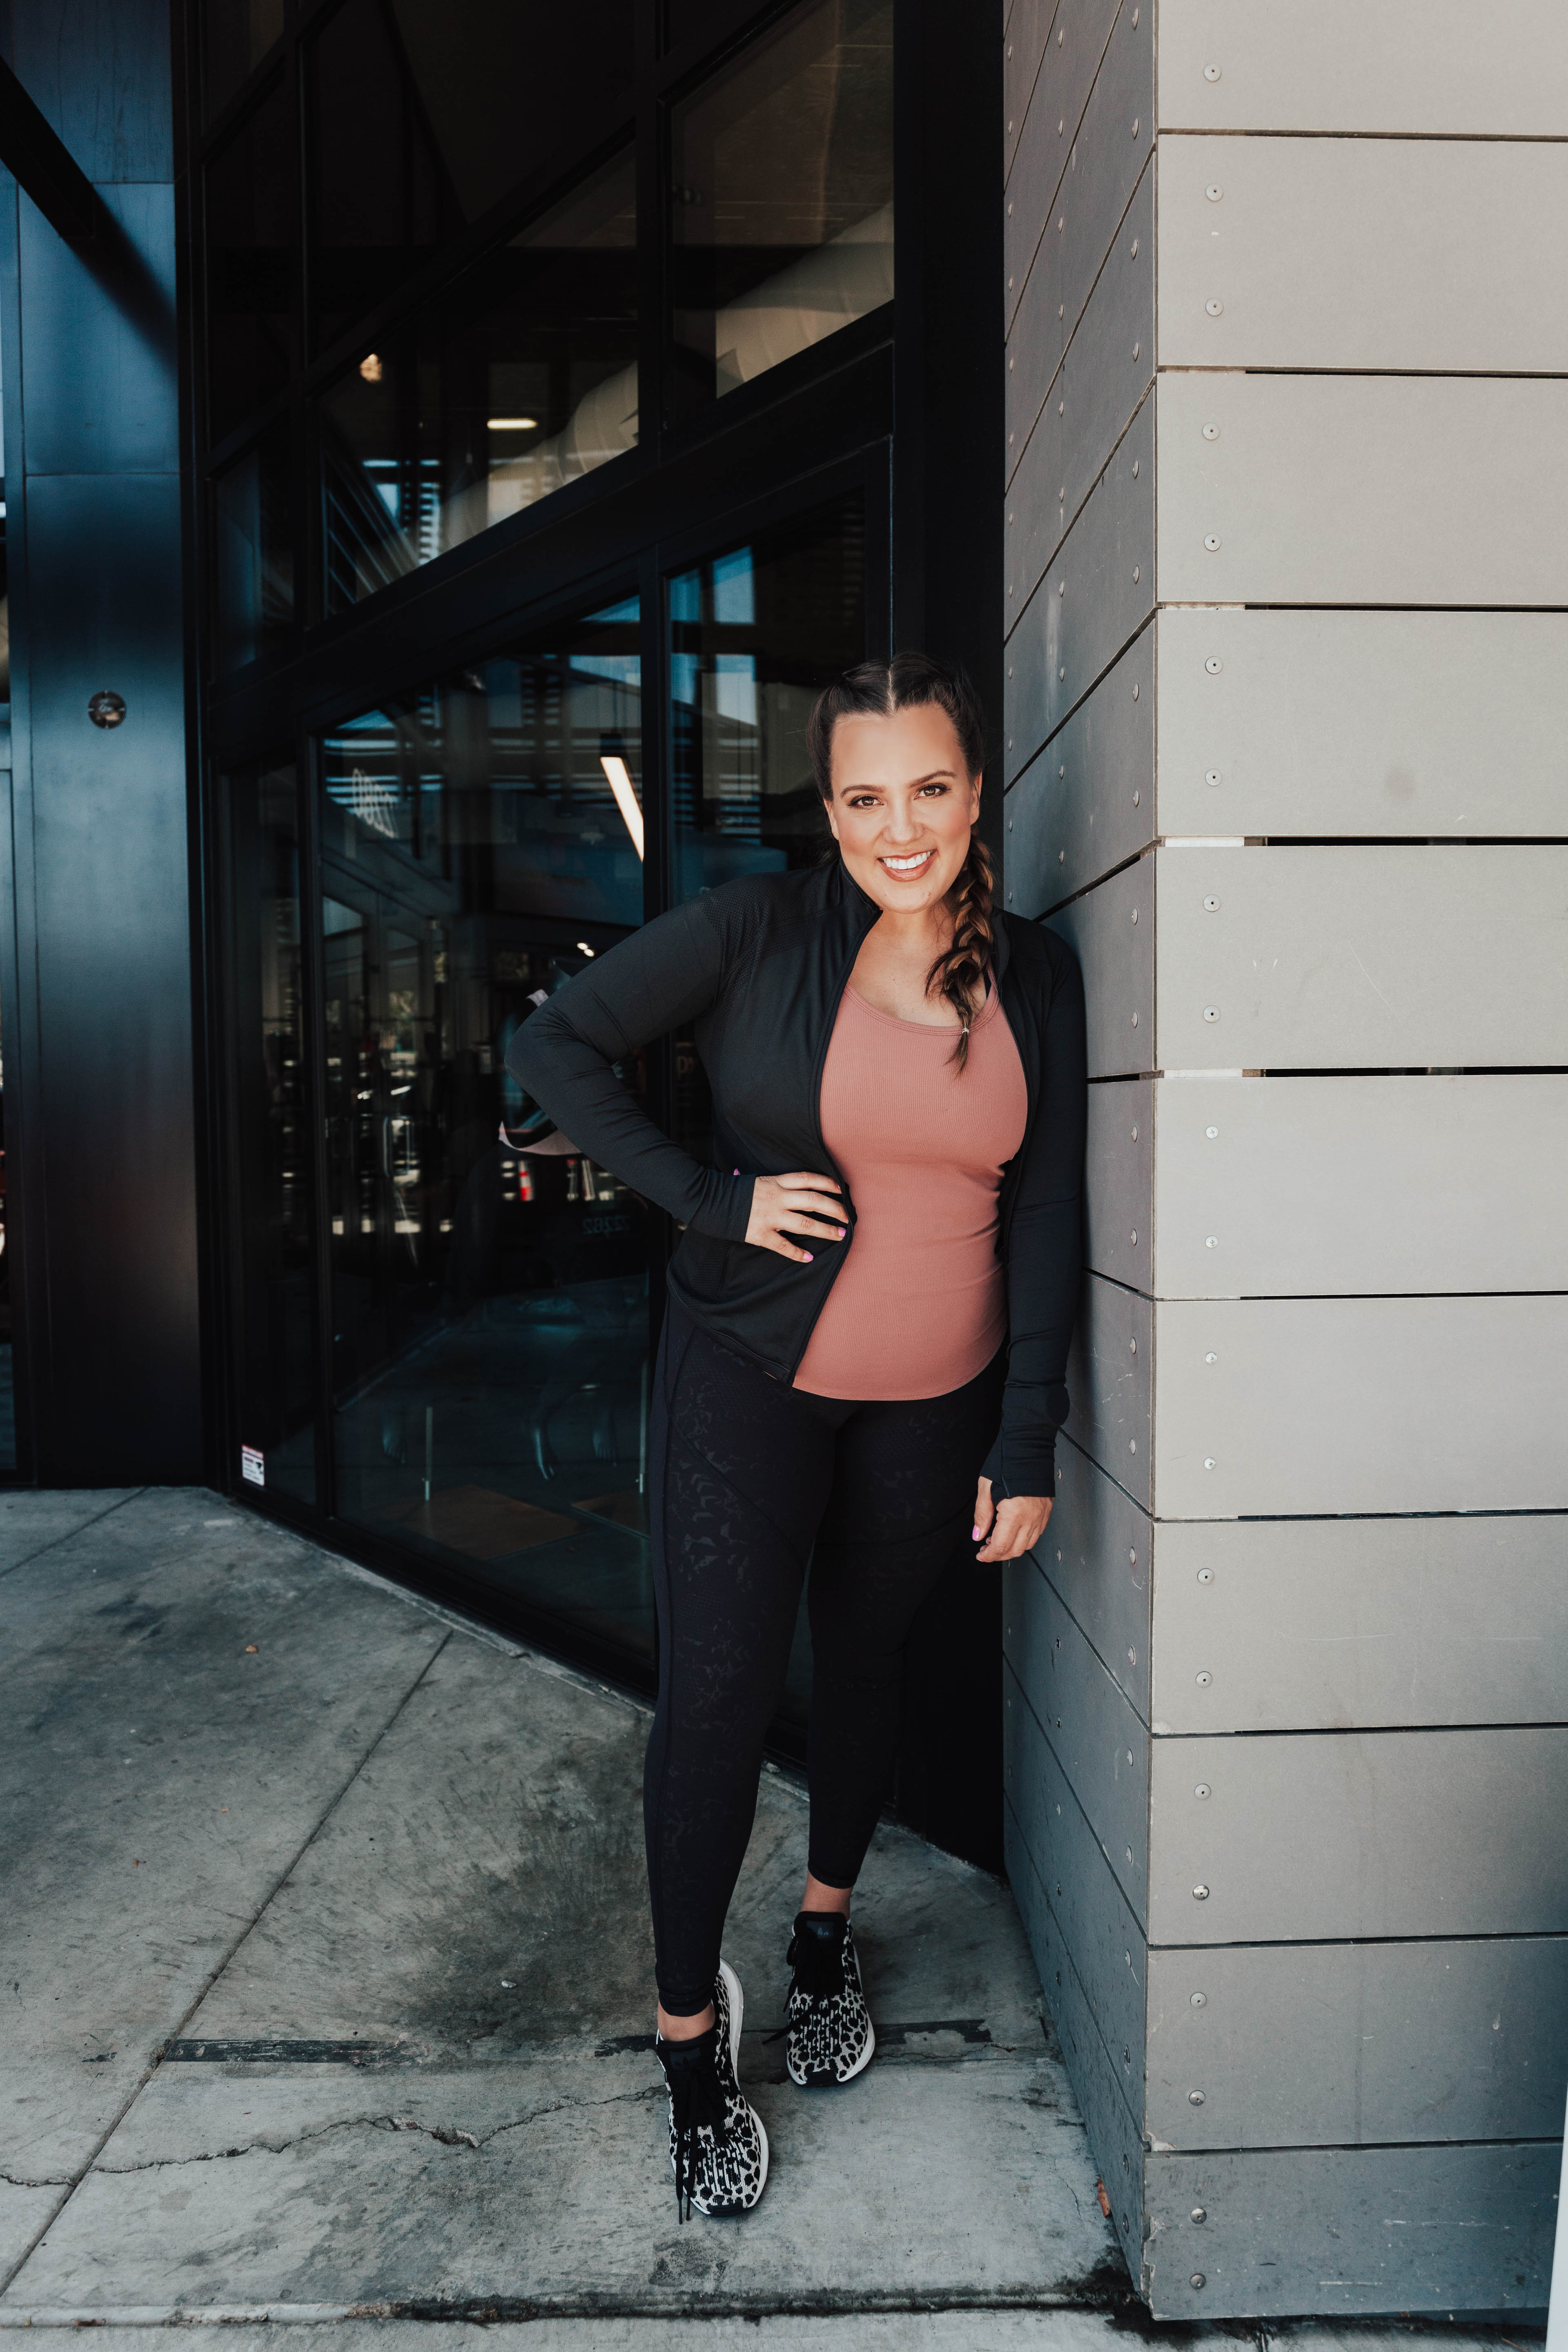 San Francisco blogger, Ashley Zeal from Two Peas in a Prada shares her first trimester fitness routine with Barry's Bootcamp Bay Area. 